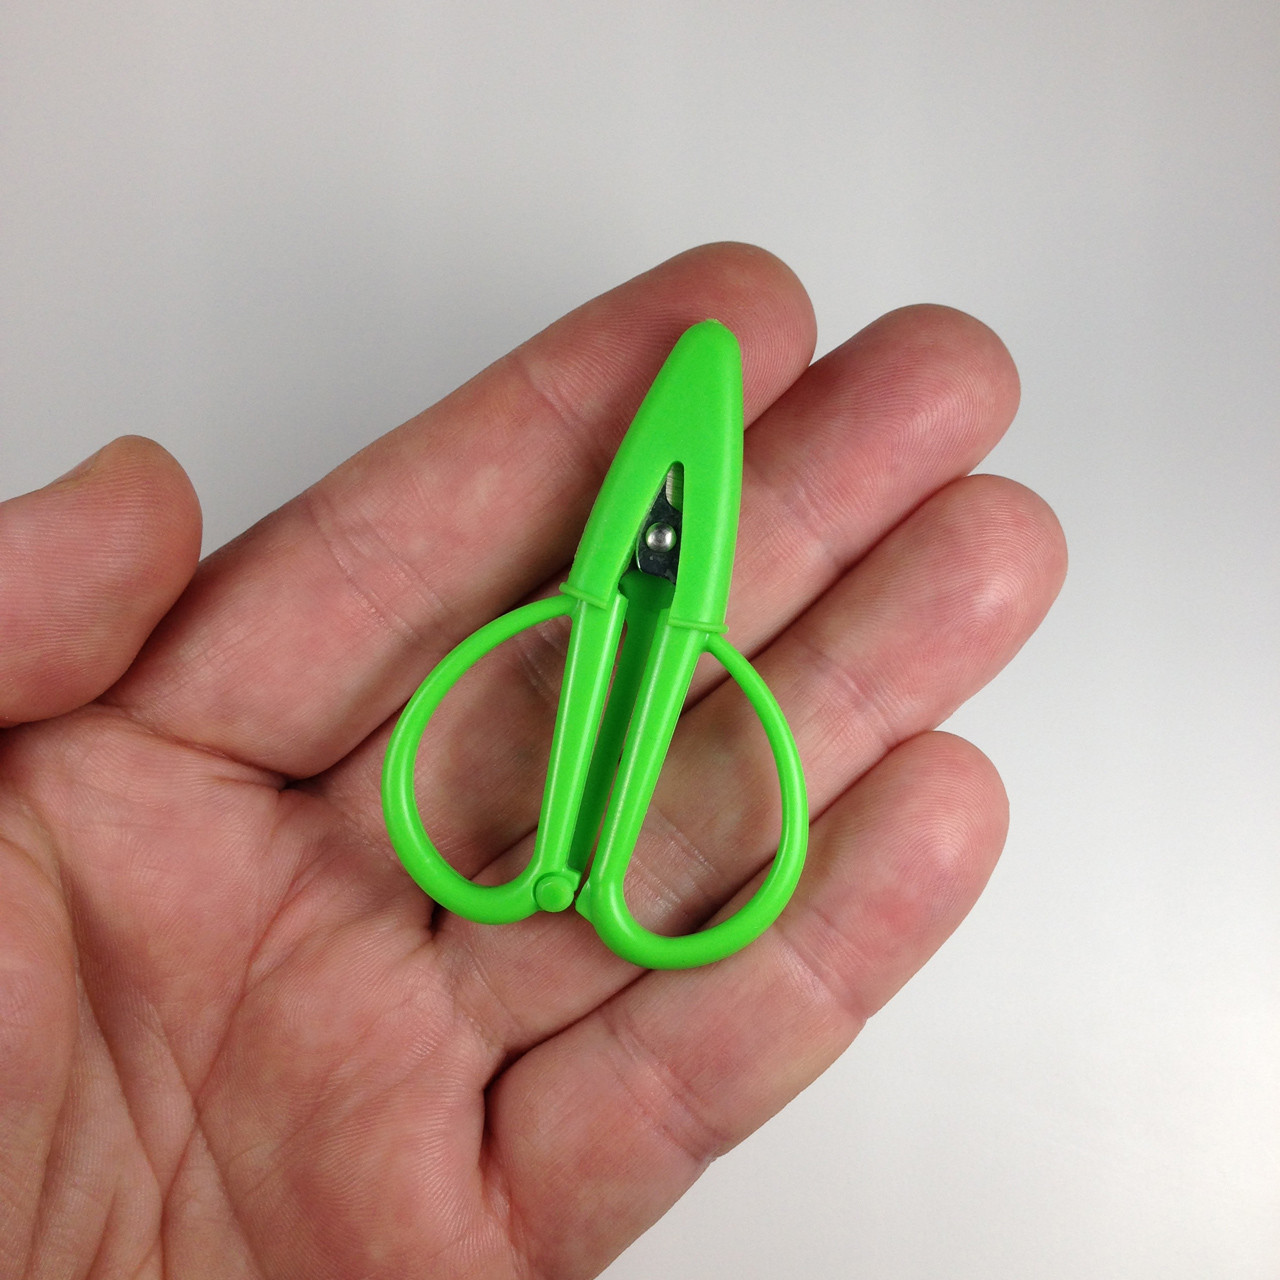 Micro Scissors with Cover